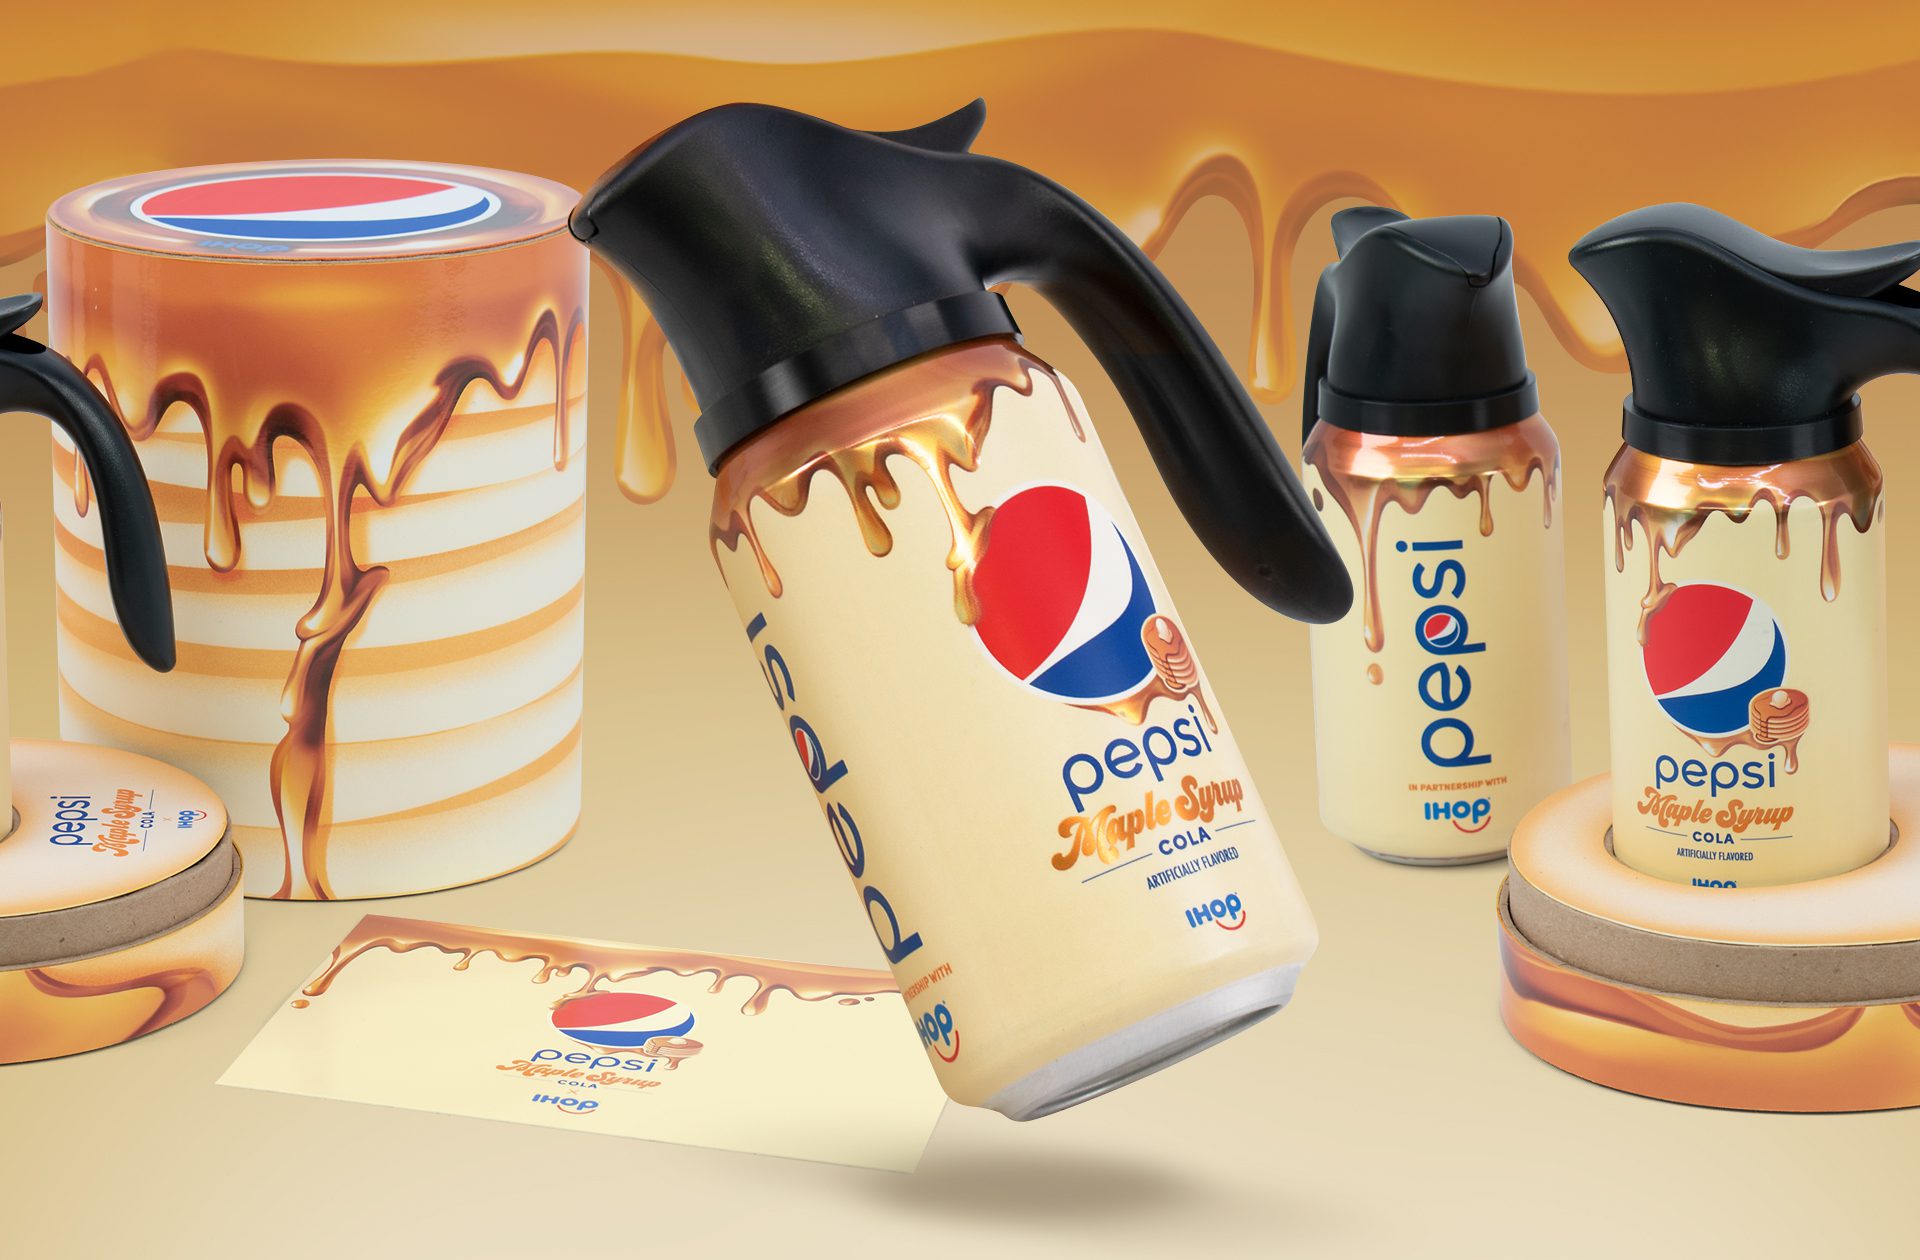 Render of an influencer unboxing experience promoting the limited edition IHOP x Pepsi maple syrup flavor, featuring three cans of cola with custom Pepsi Spouts, inspired by the iconic IHOP syrup pitchers, and a customized note for influencers.